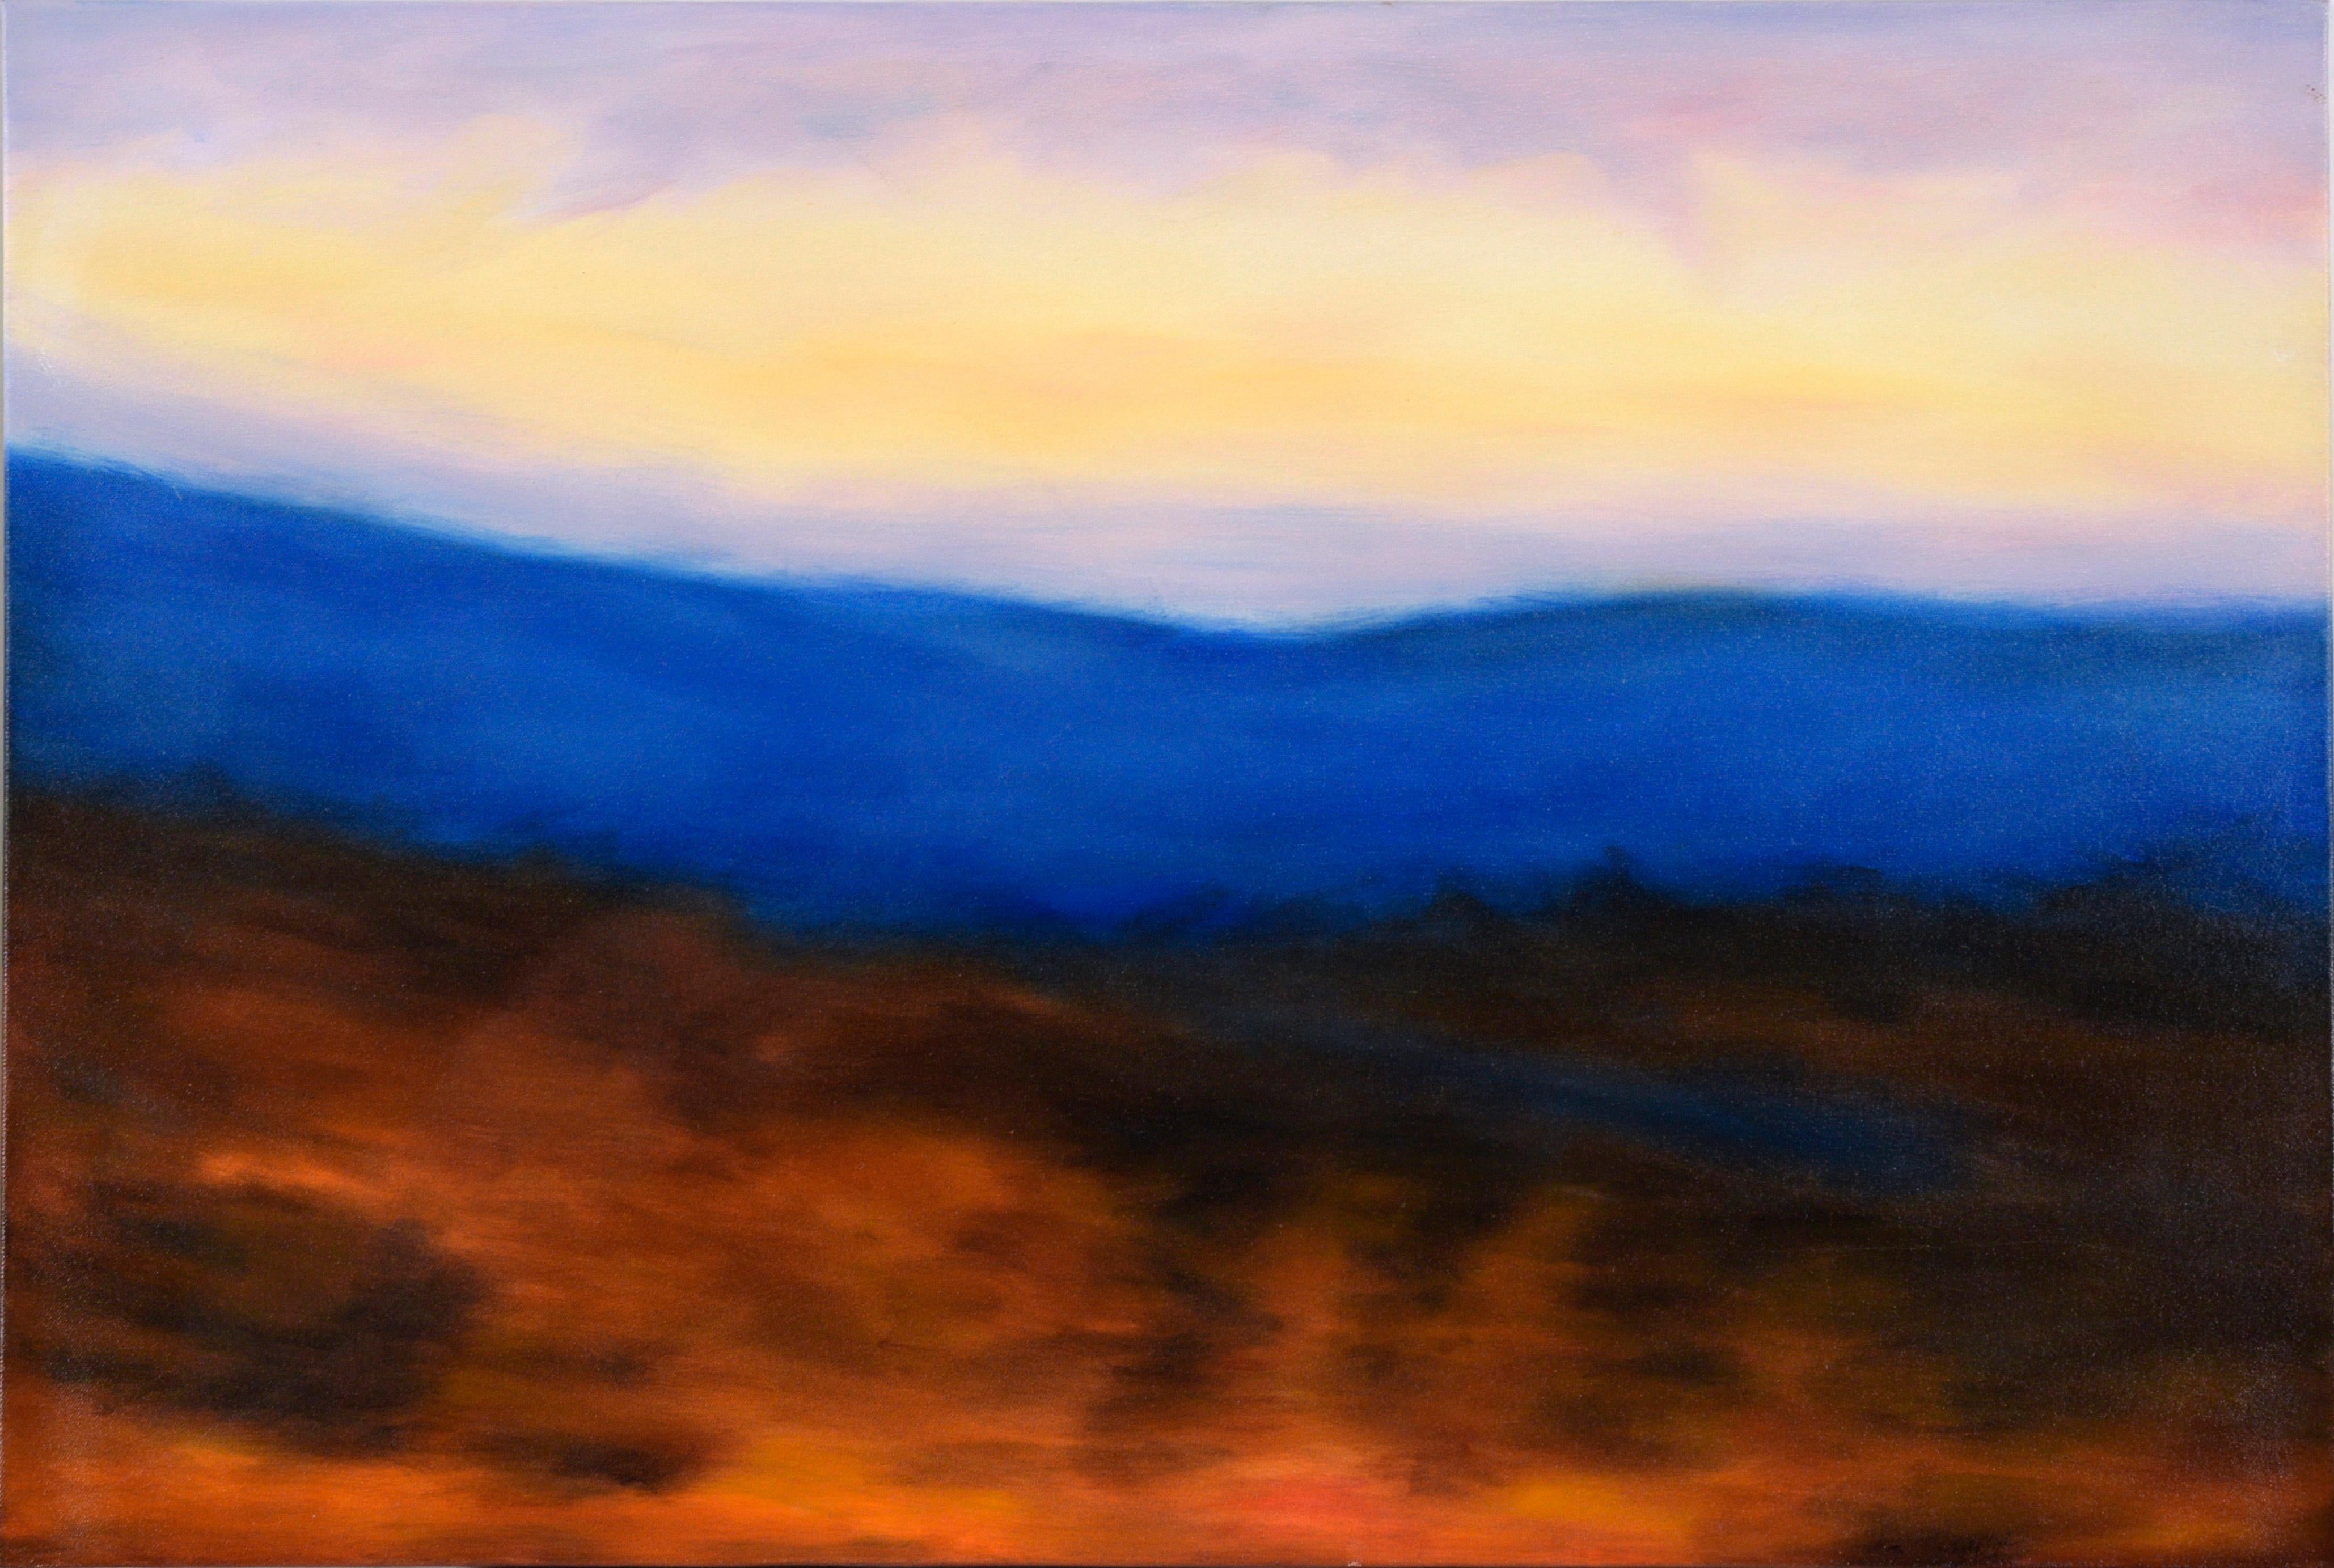 Kelly Cool Lucas Landscape Painting - Hazy Sunrise over Blue Mountains - Landscape in Oil on Canvas